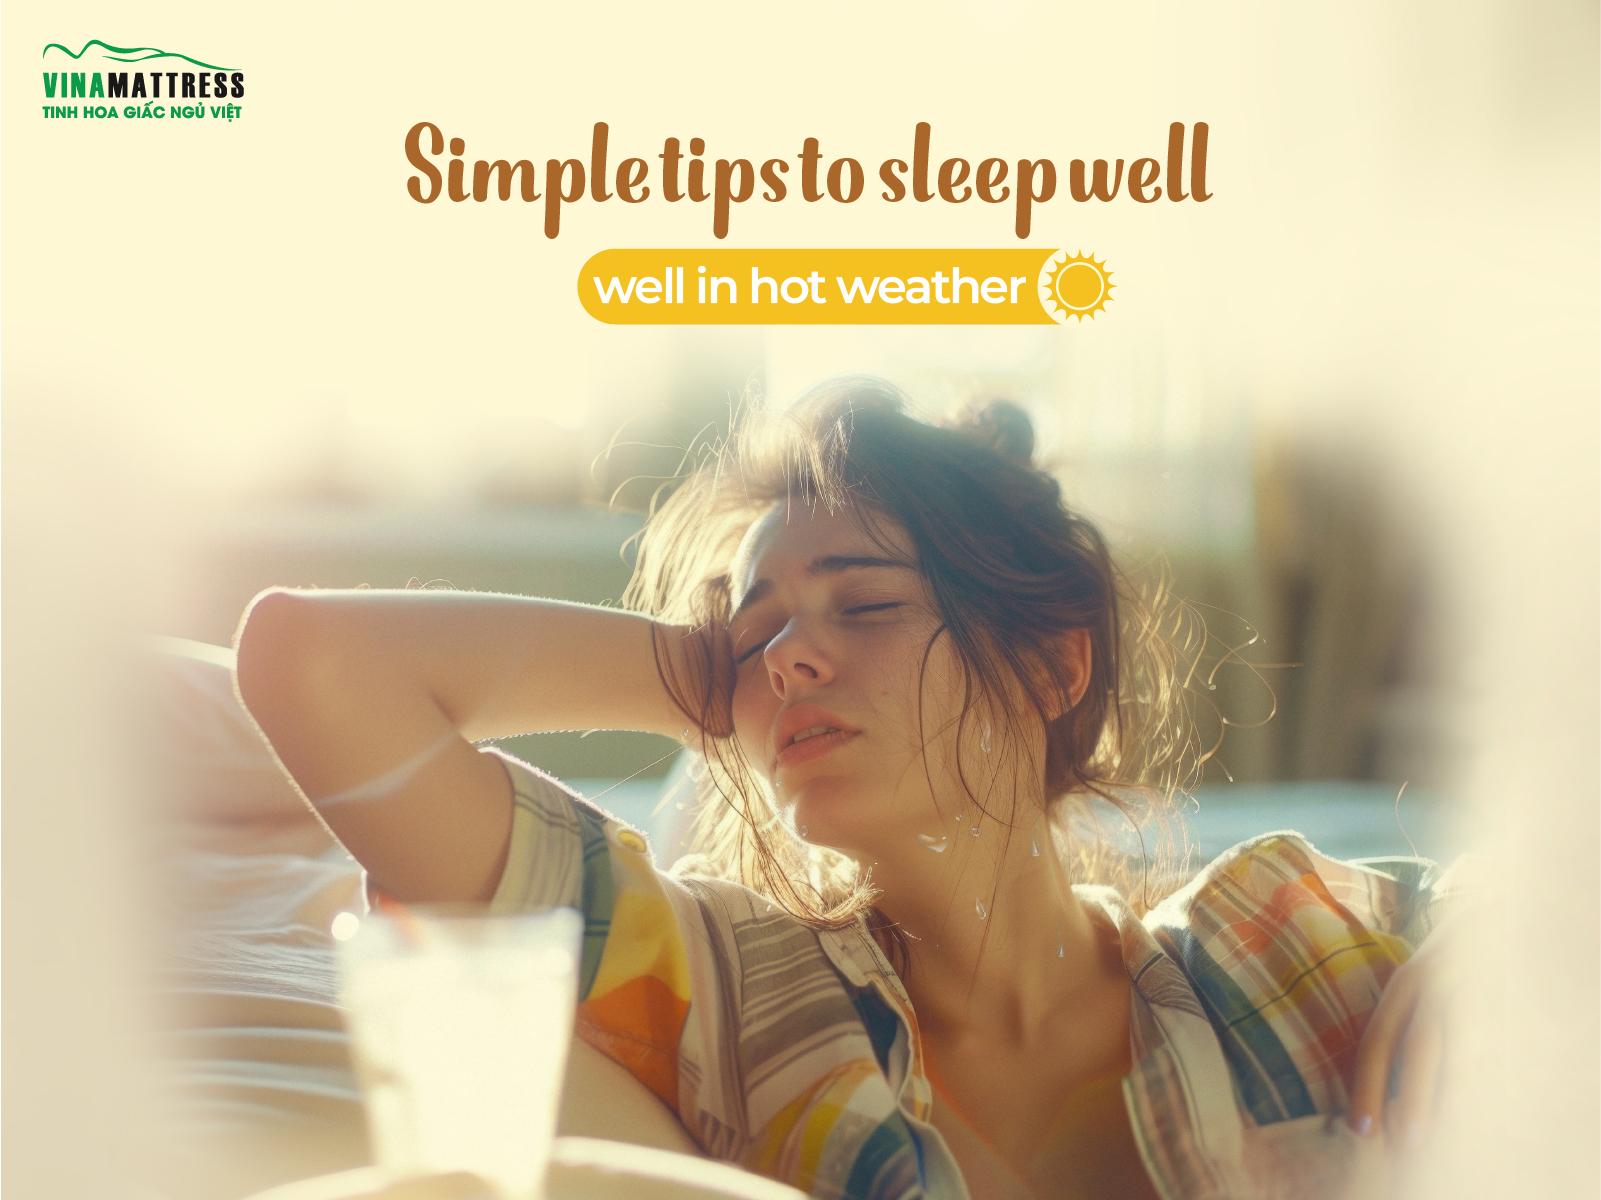 Simple tips to sleep well in hot weather